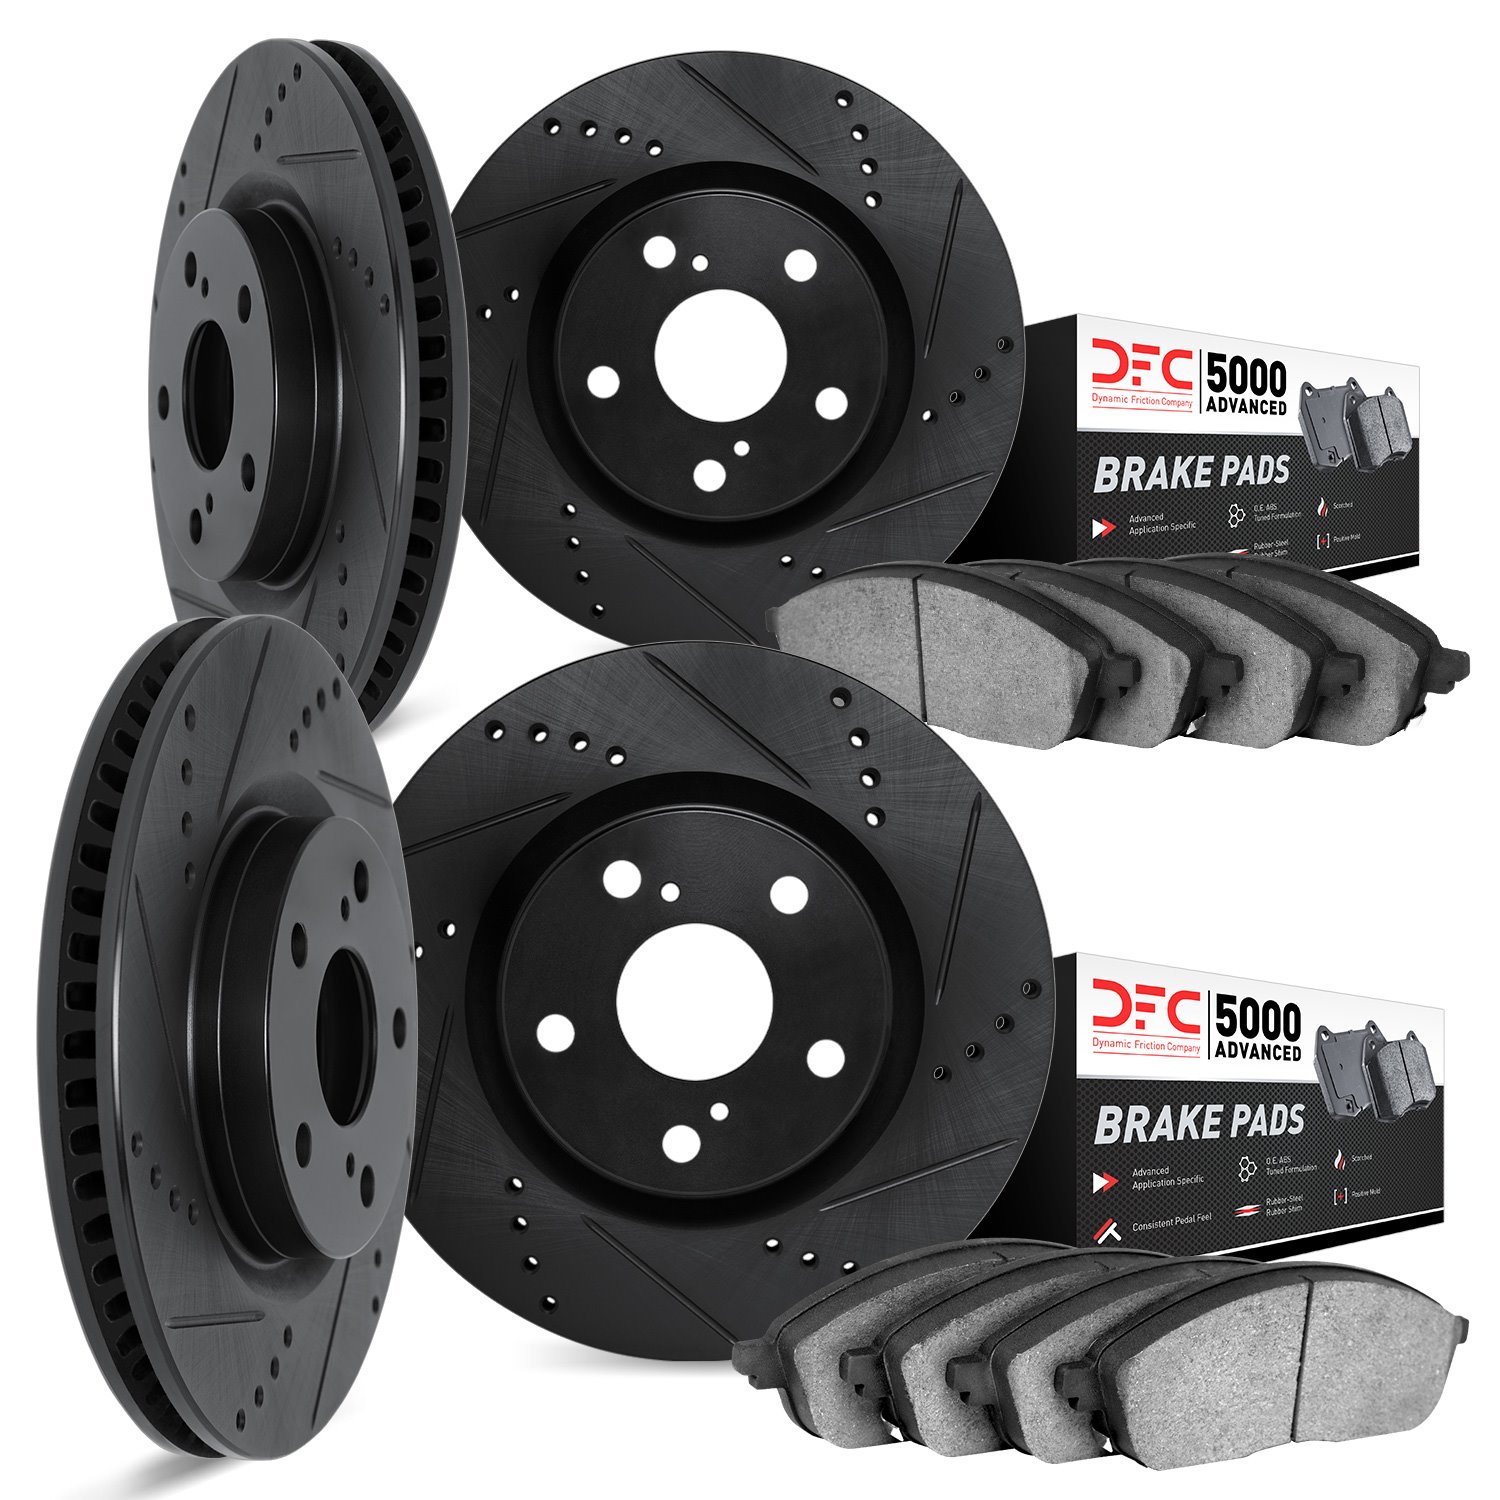 8504-02008 Drilled/Slotted Brake Rotors w/5000 Advanced Brake Pads Kit [Black], 1986-1986 Porsche, Position: Front and Rear